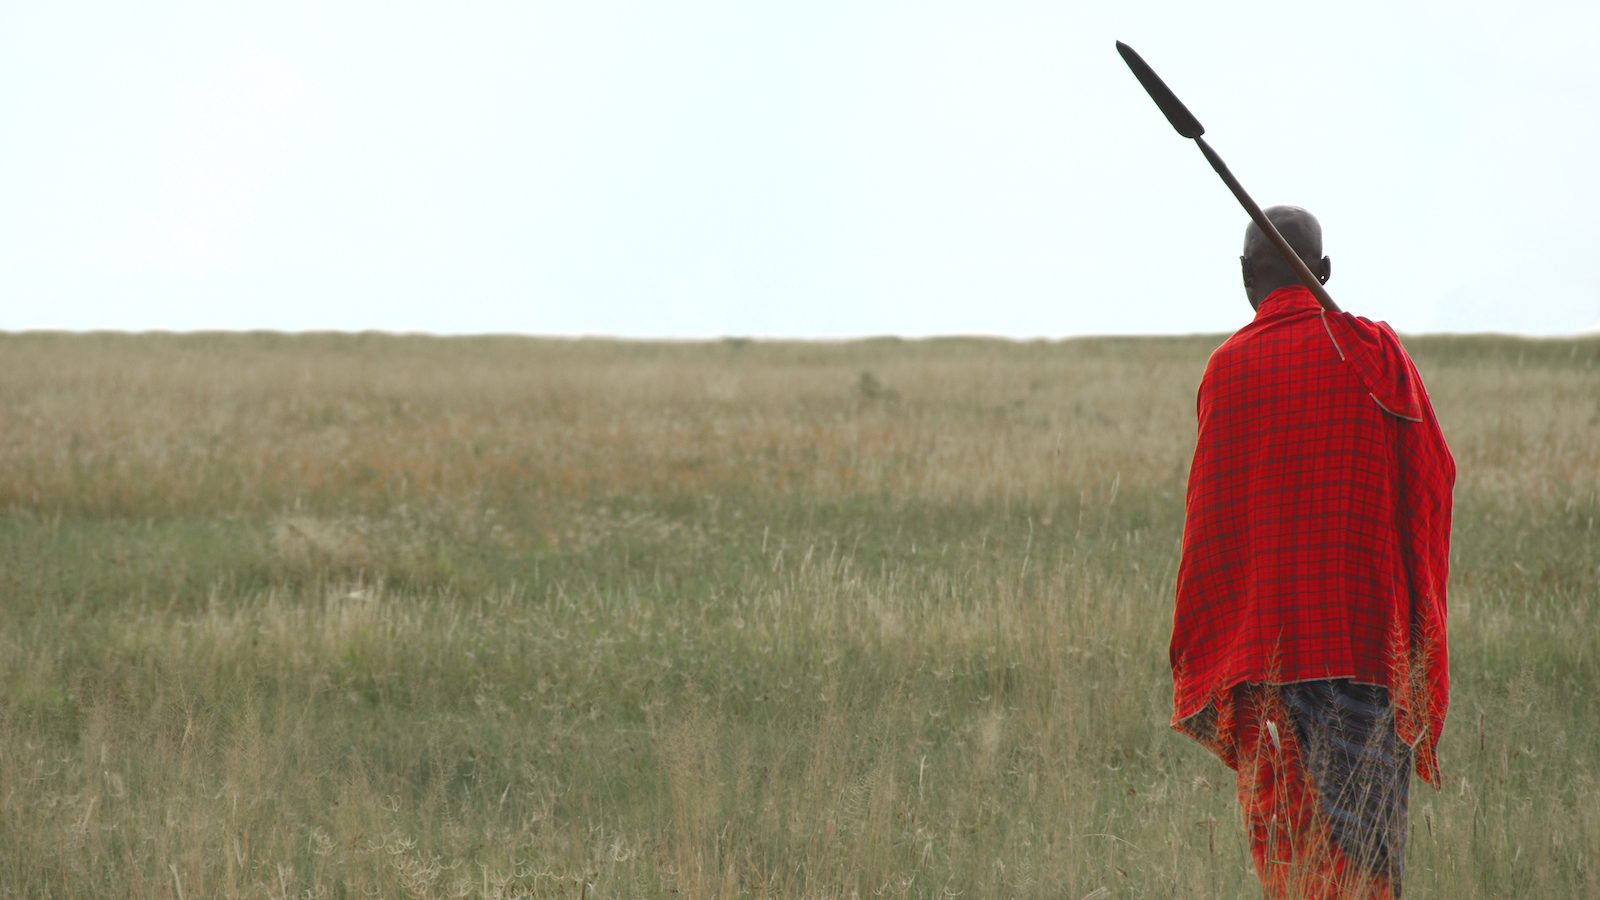 Maasai person with spear and blanket standing in tall grass